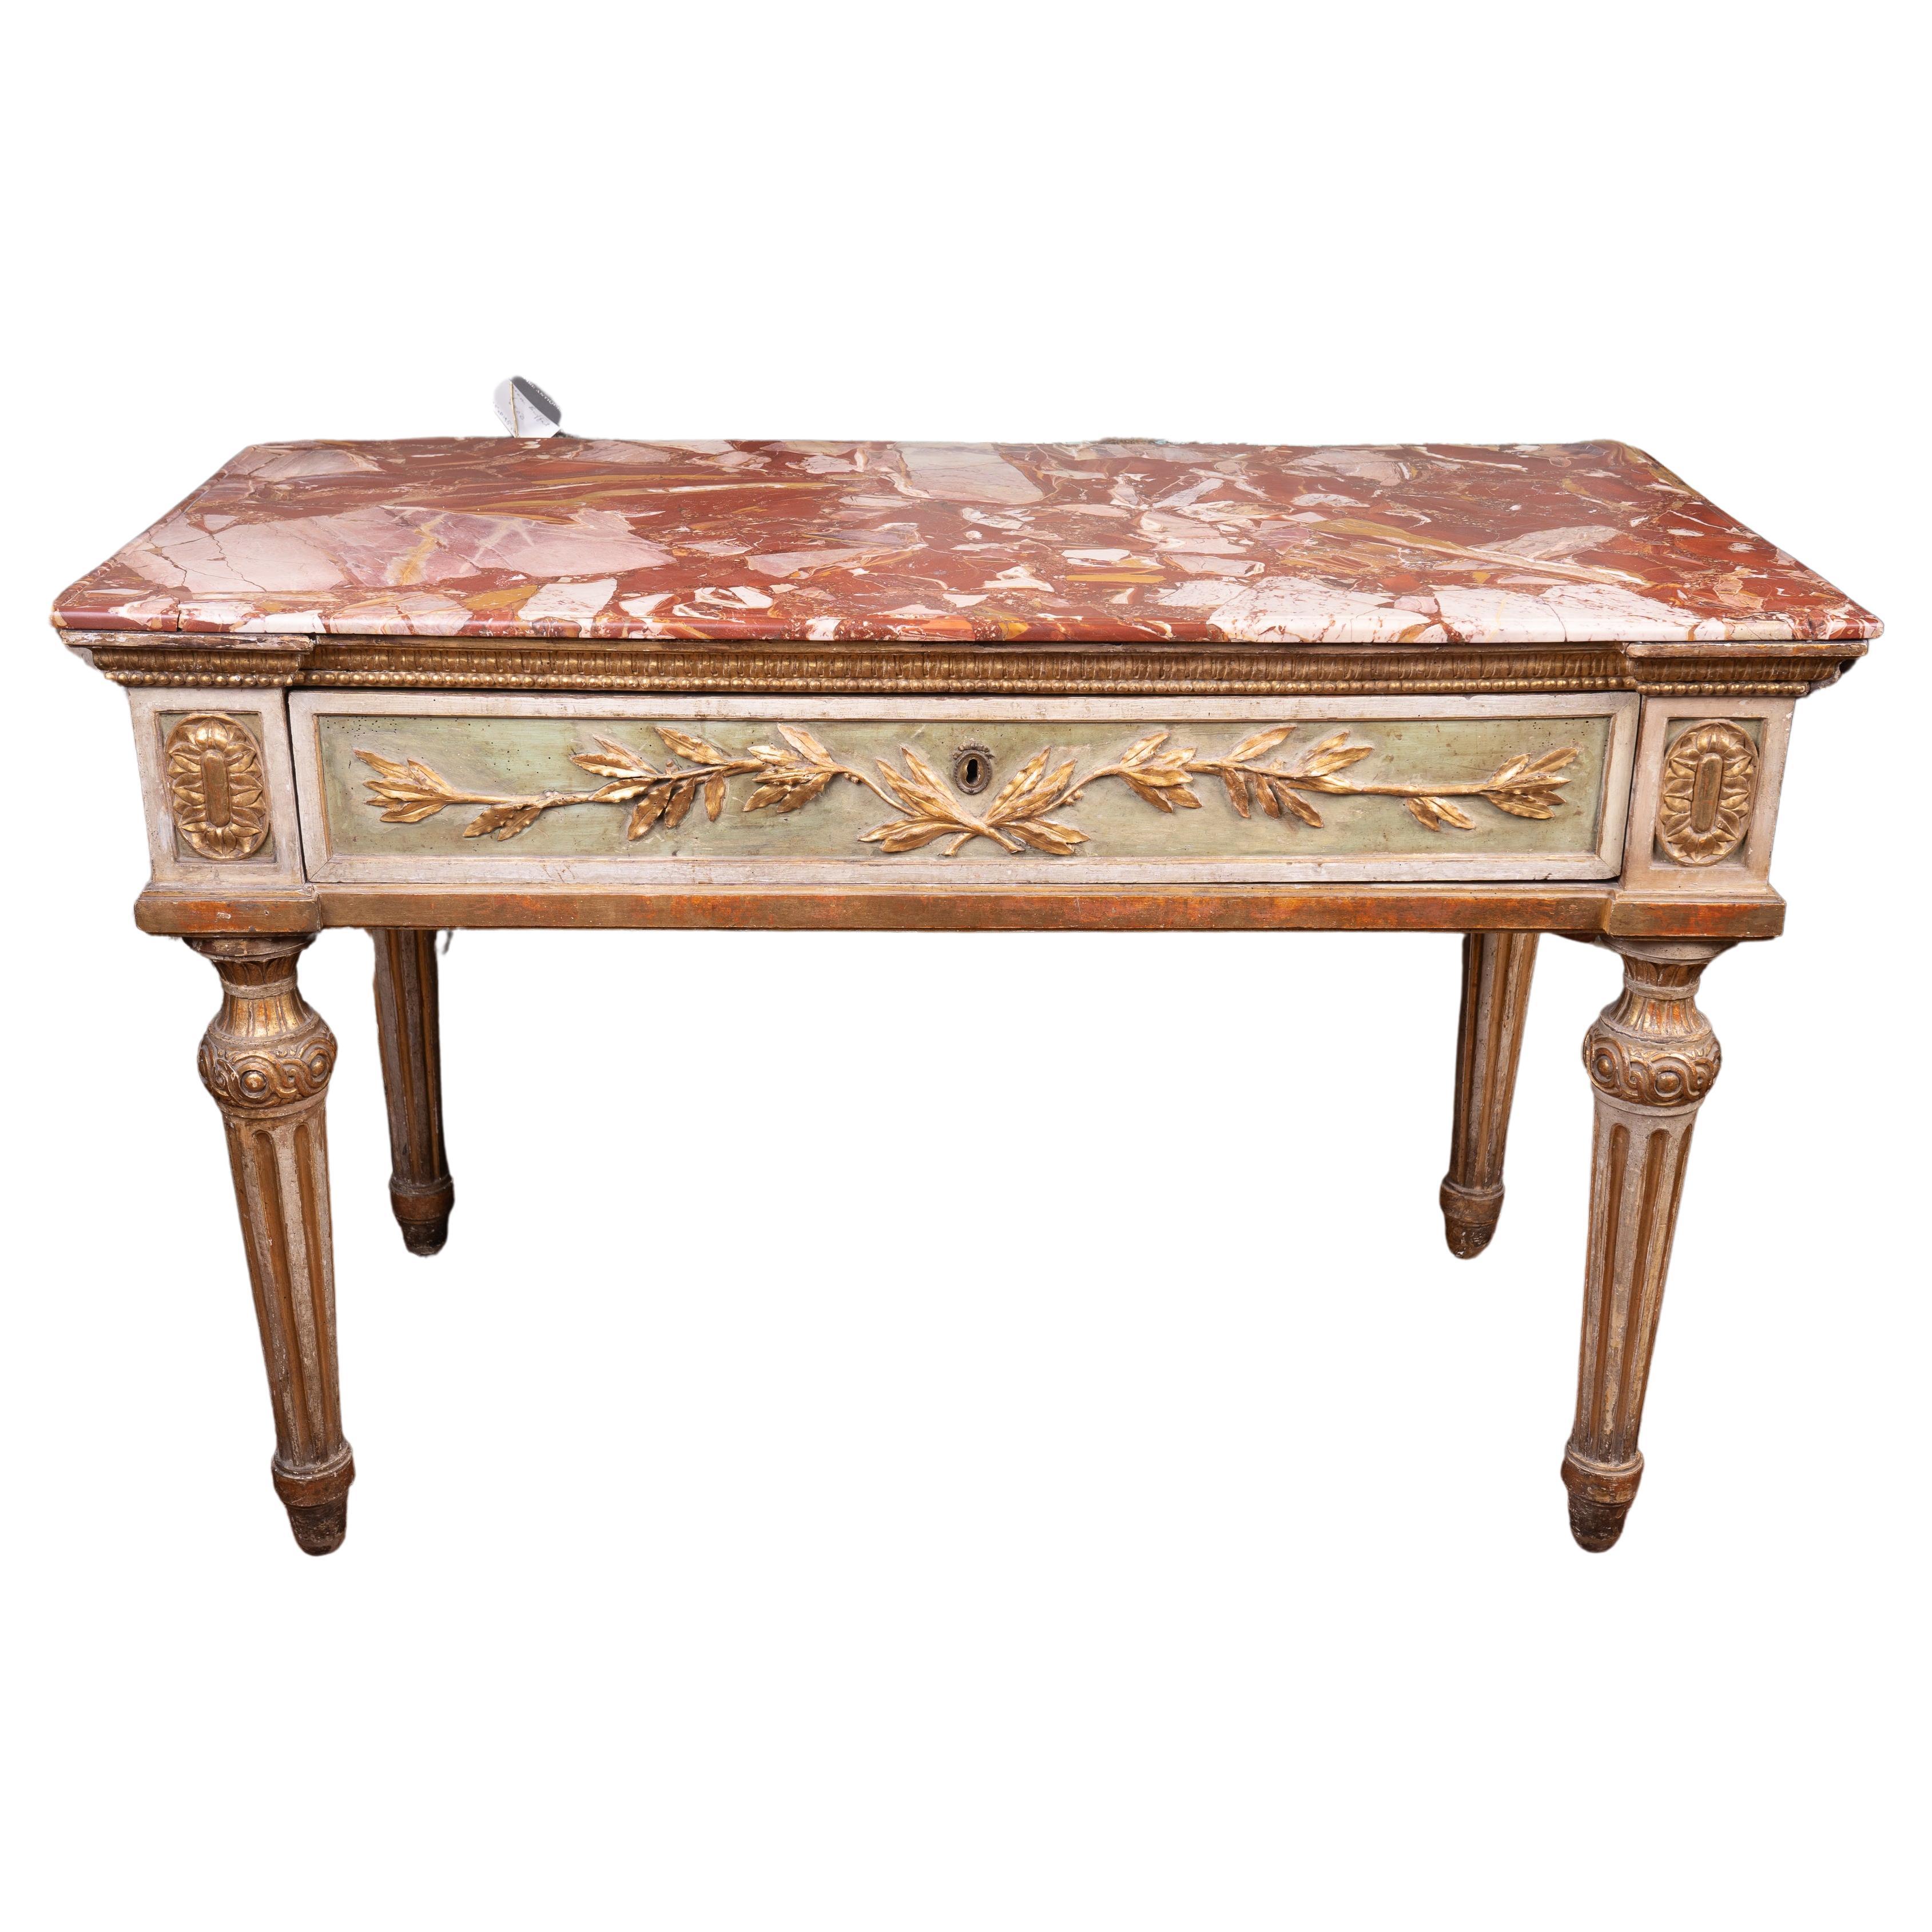 Exceptional 18thc Painted and Gilded Roman Console